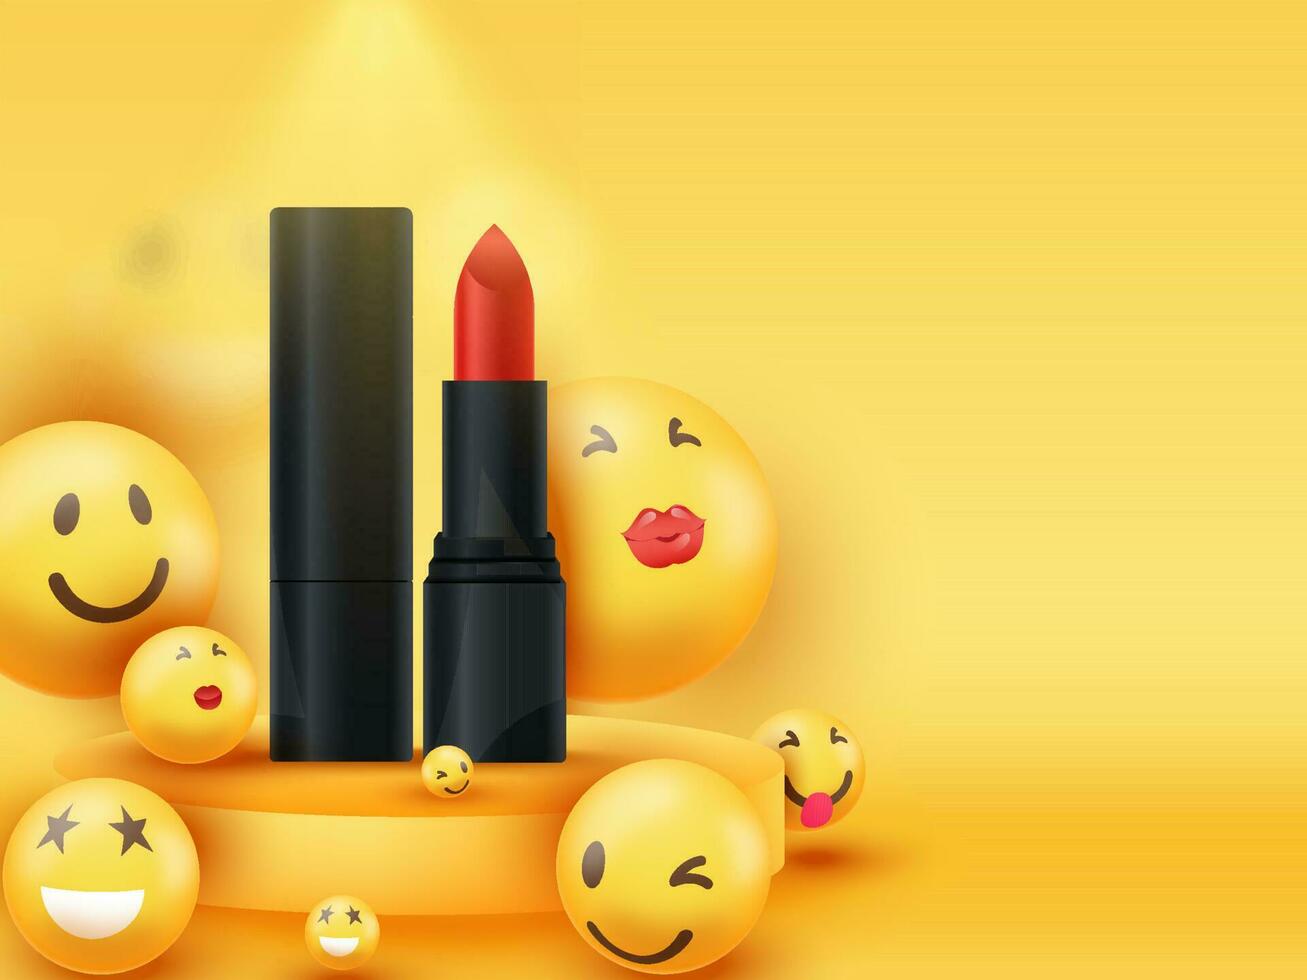 Realistic Lipstick With Different Expression Emoji. vector